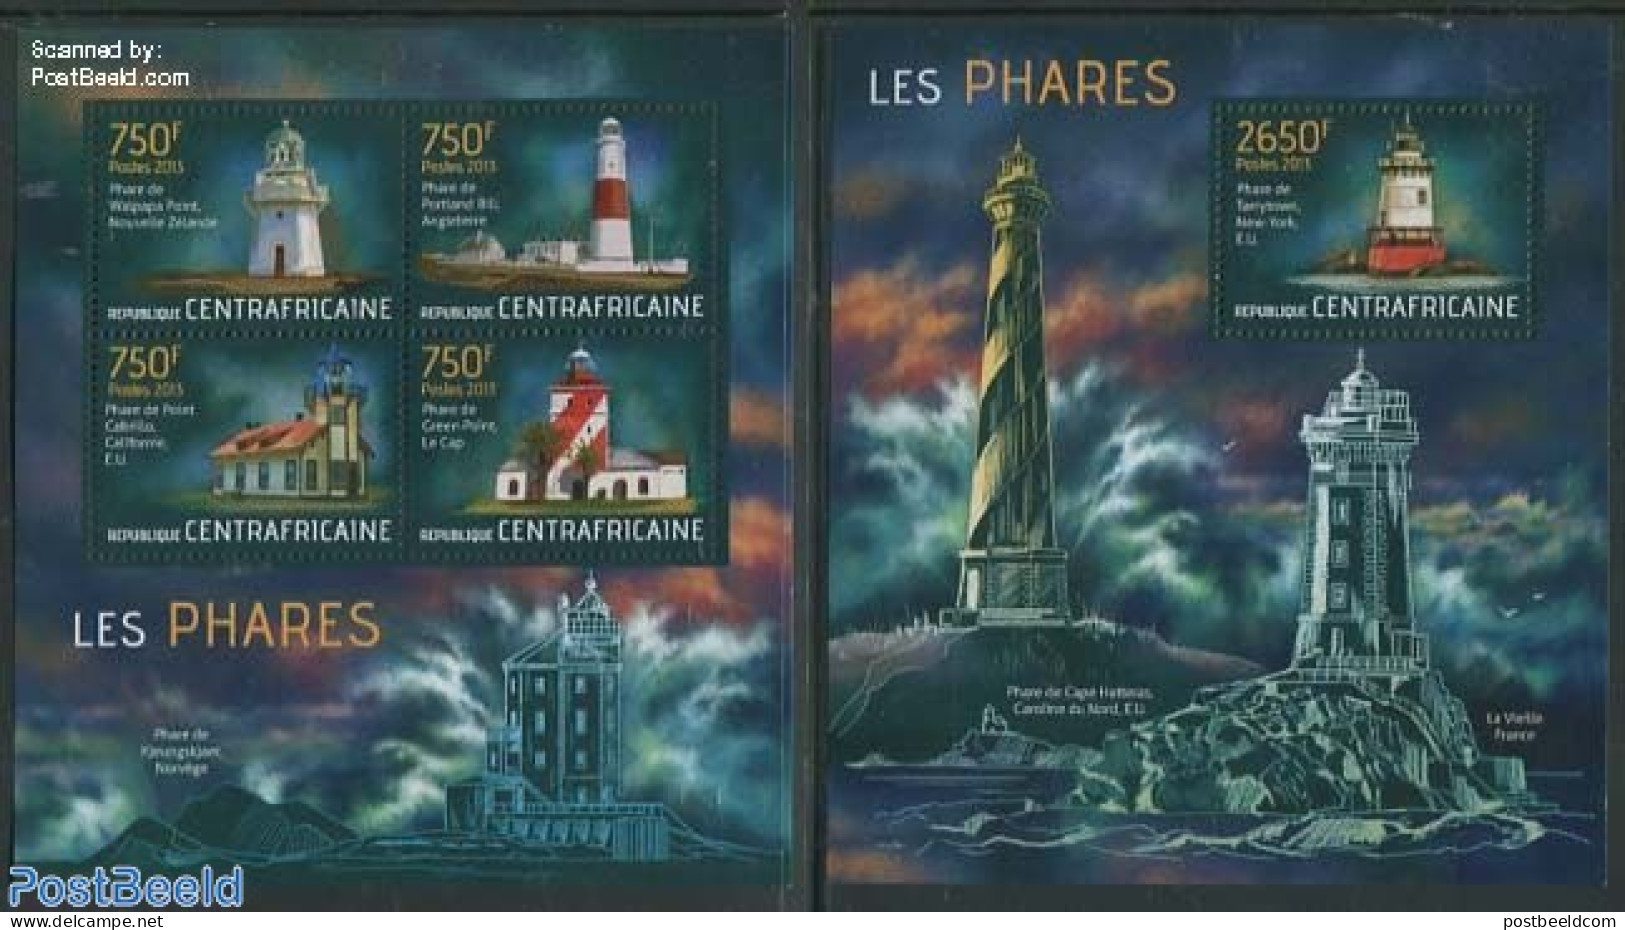 Central Africa 2013 Lighthouses 2 S/s, Mint NH, Various - Lighthouses & Safety At Sea - Leuchttürme